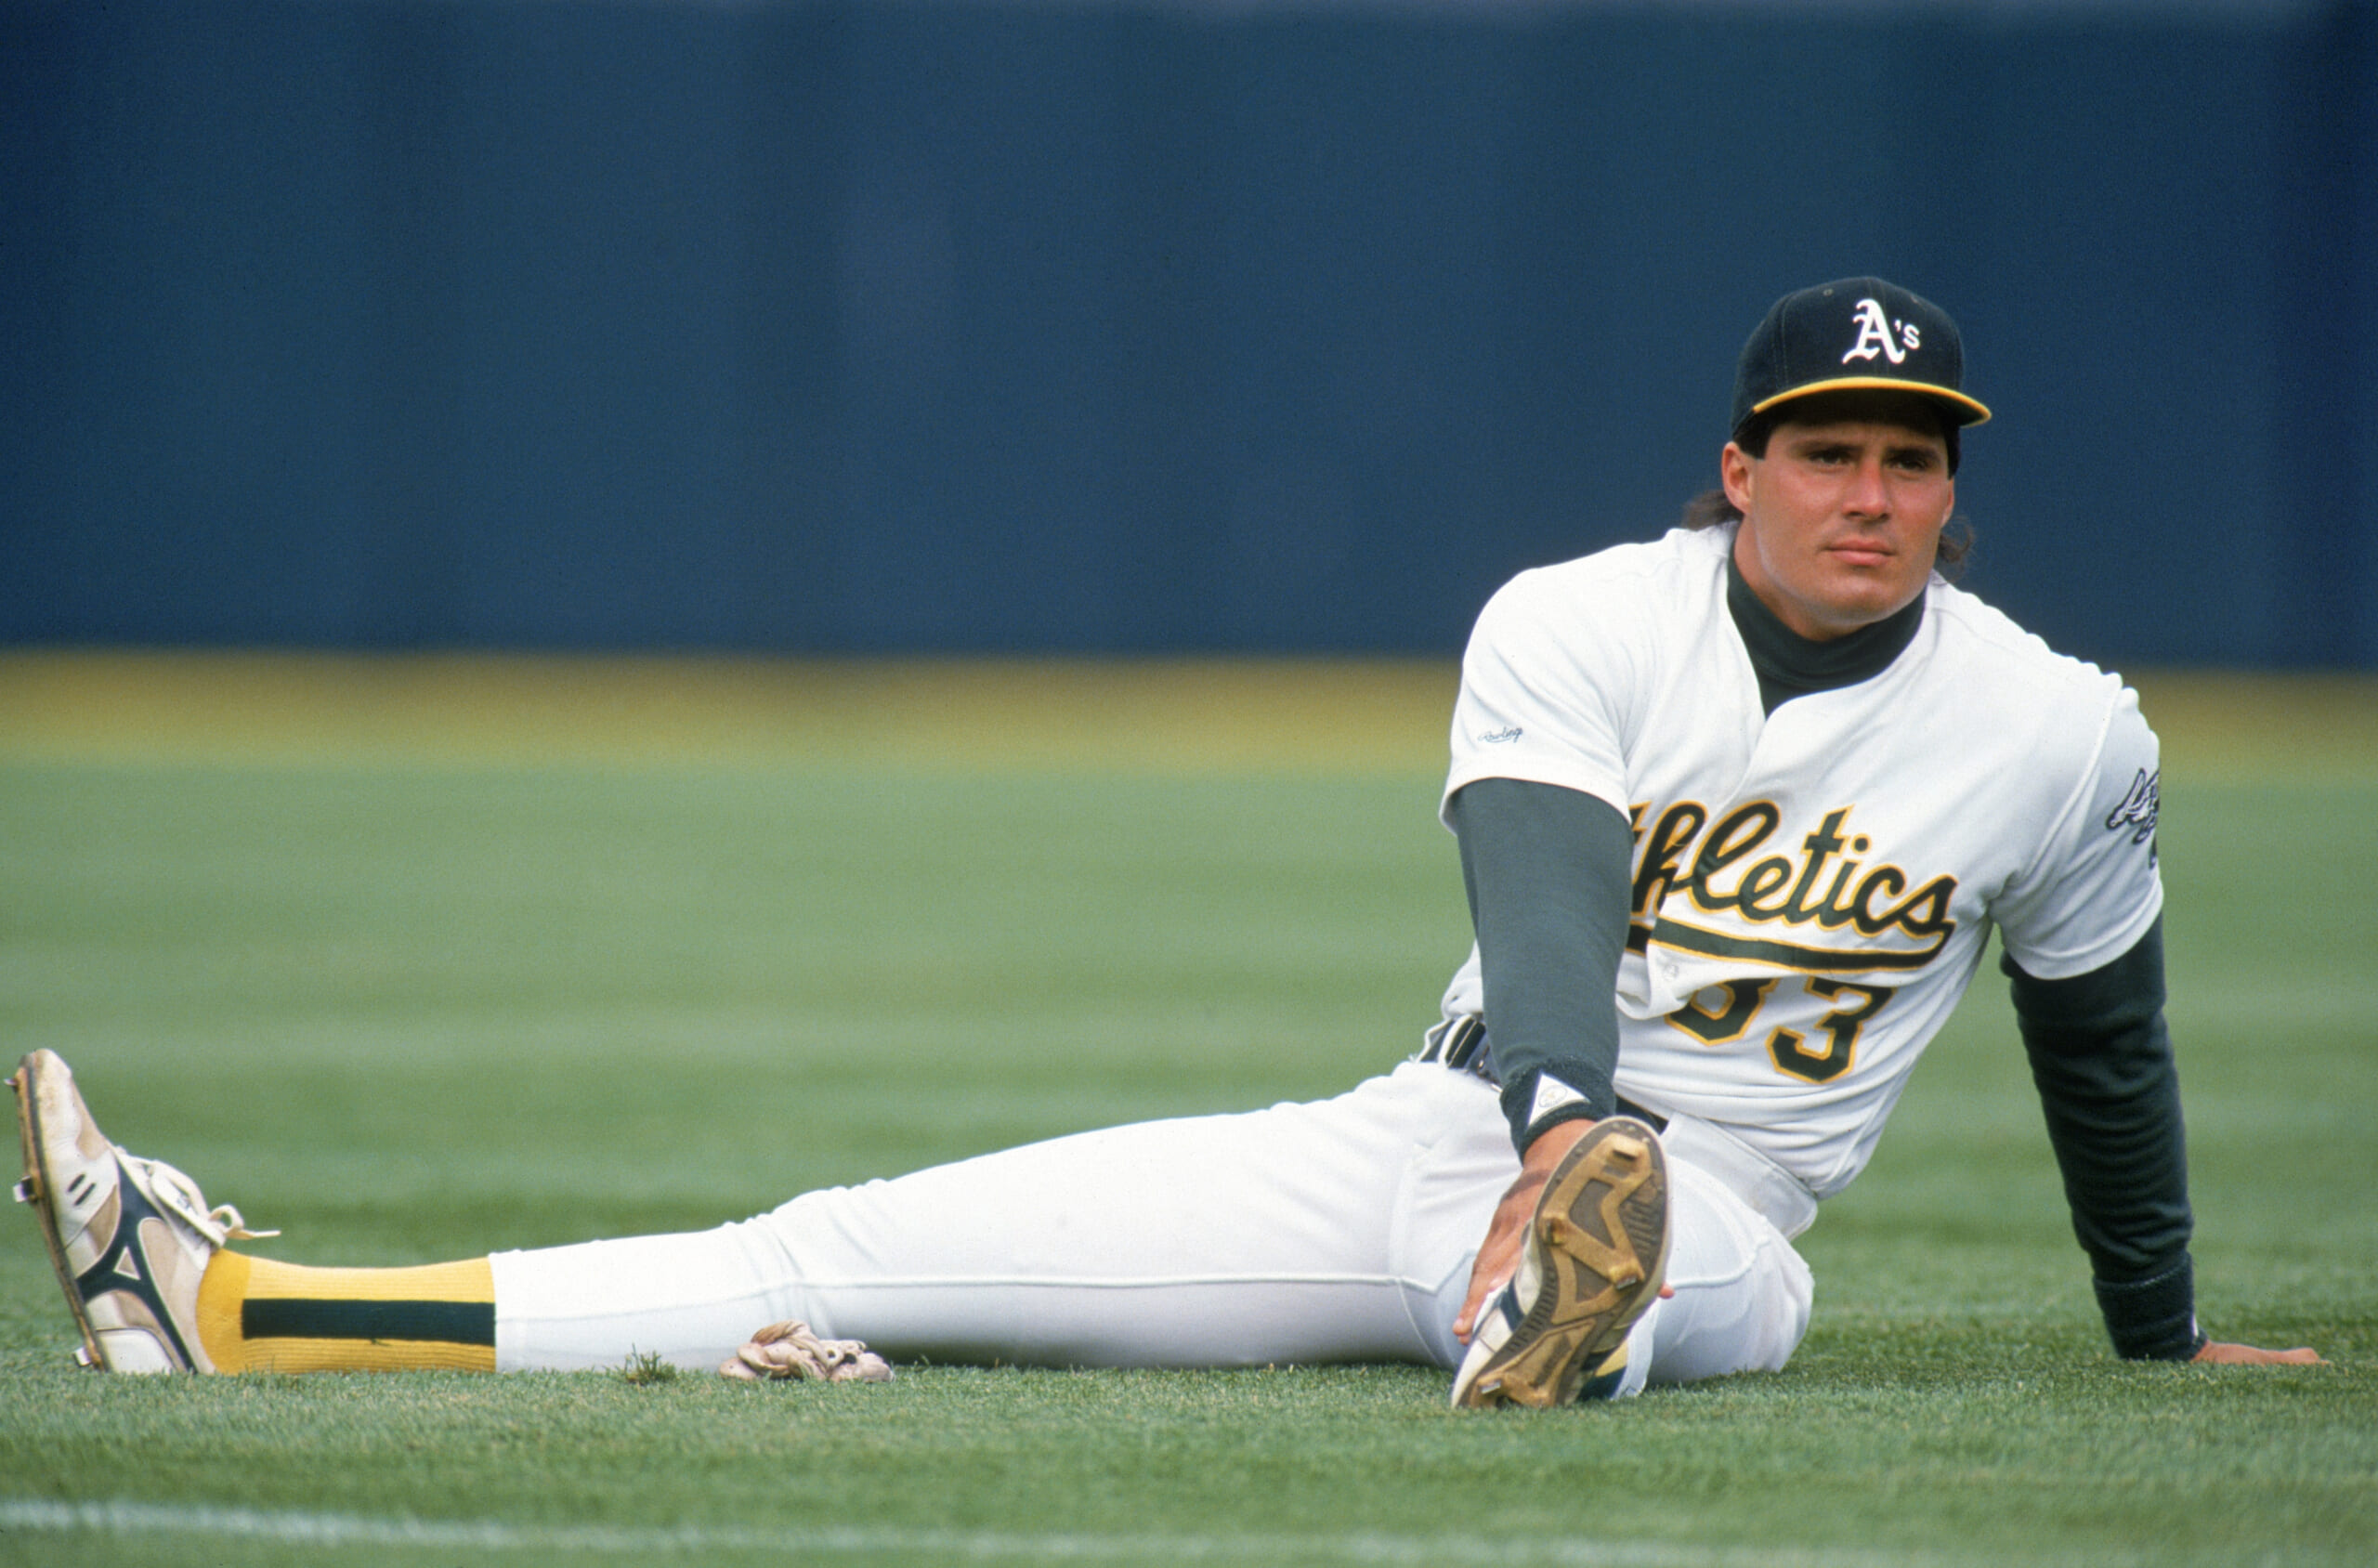 Jose Canseco Went on a Rant About PED Users in the Hall of Fame